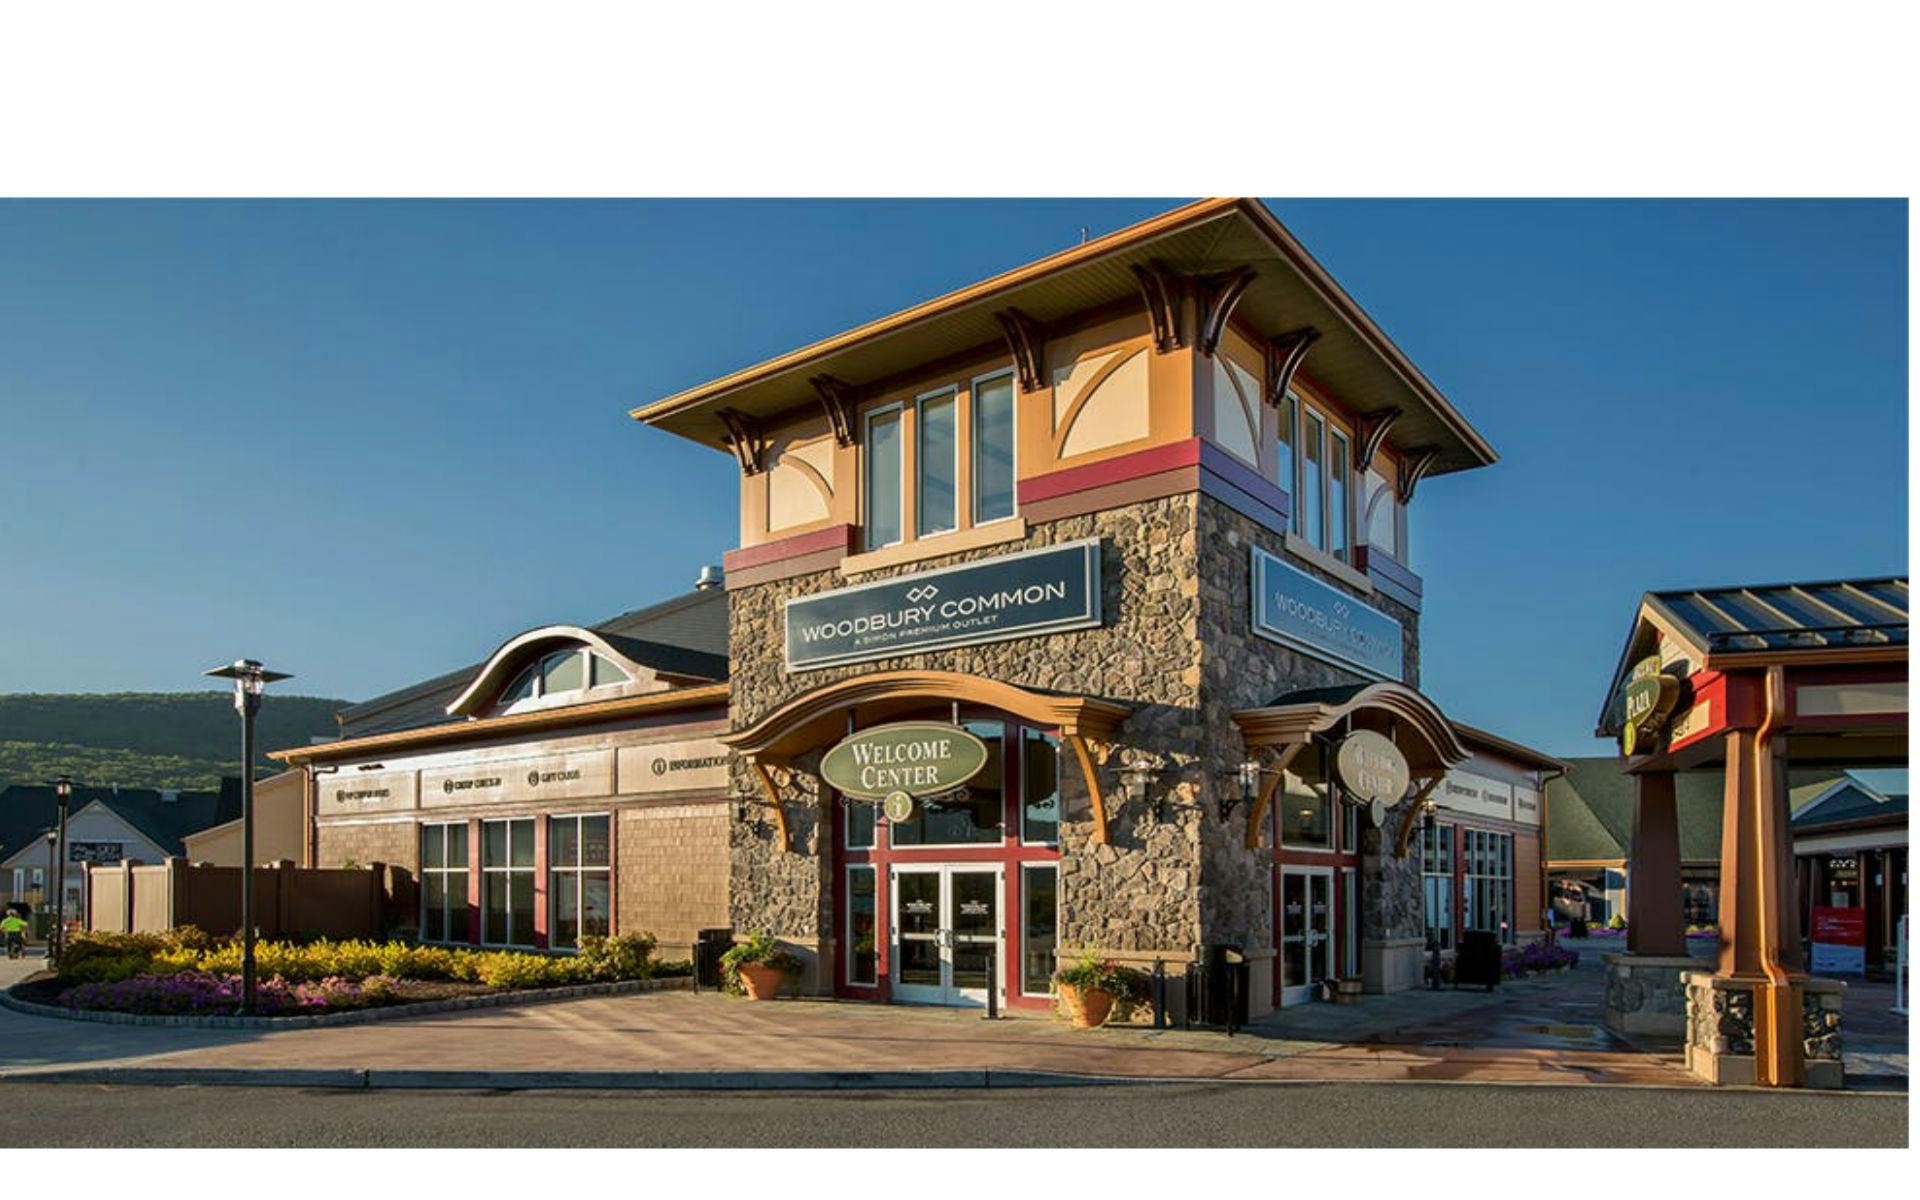 Woodbury Common Premium Outlets shopping from Manhattan Musement